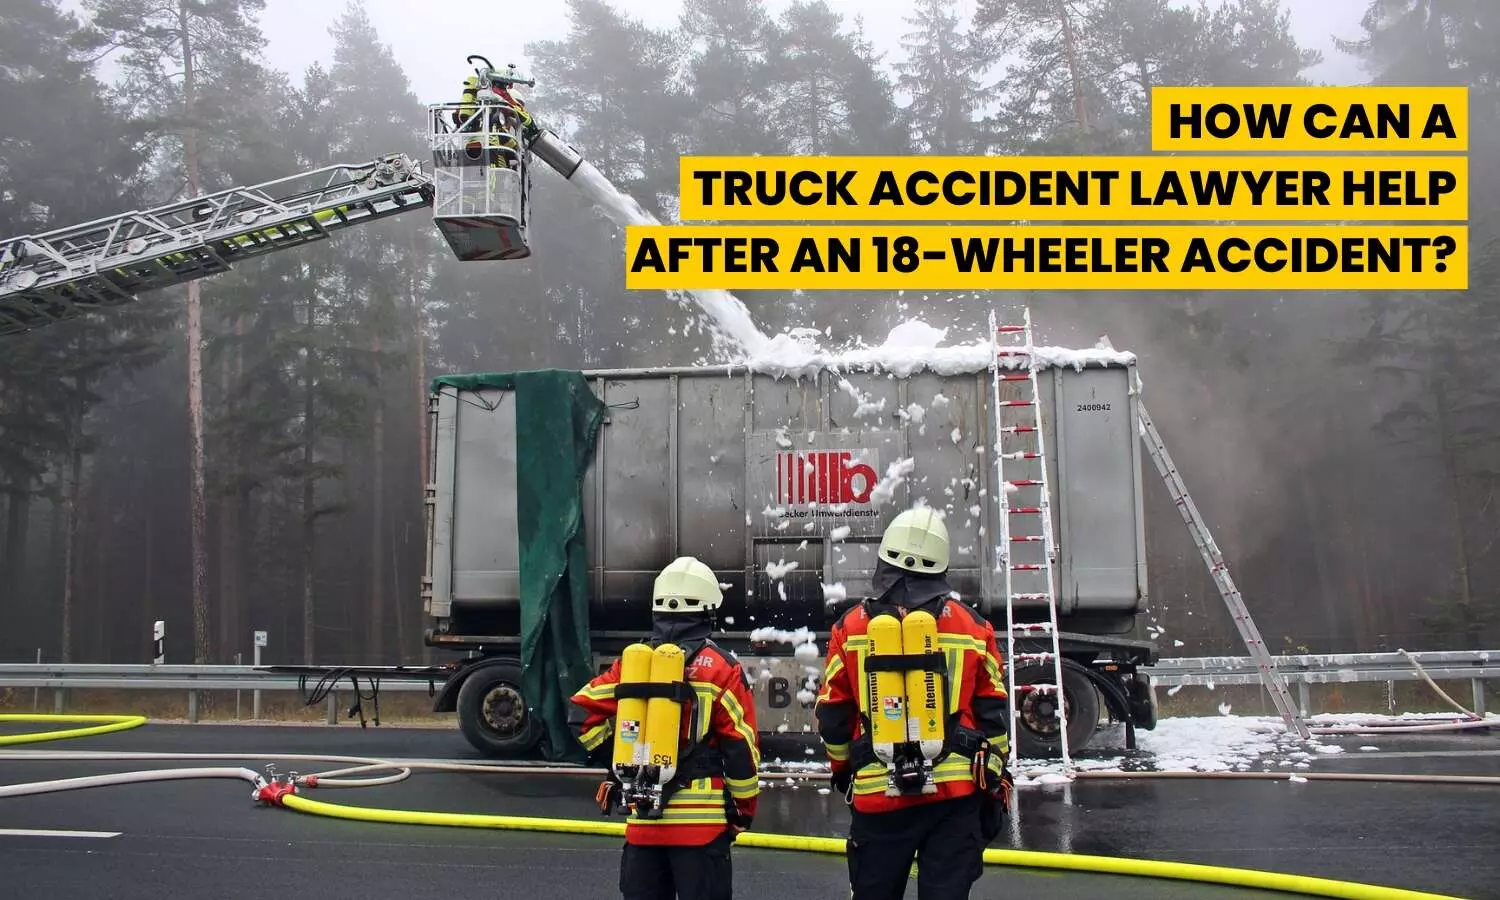 How Can a Truck Accident Lawyer Help Me After an 18-Wheeler Accident?